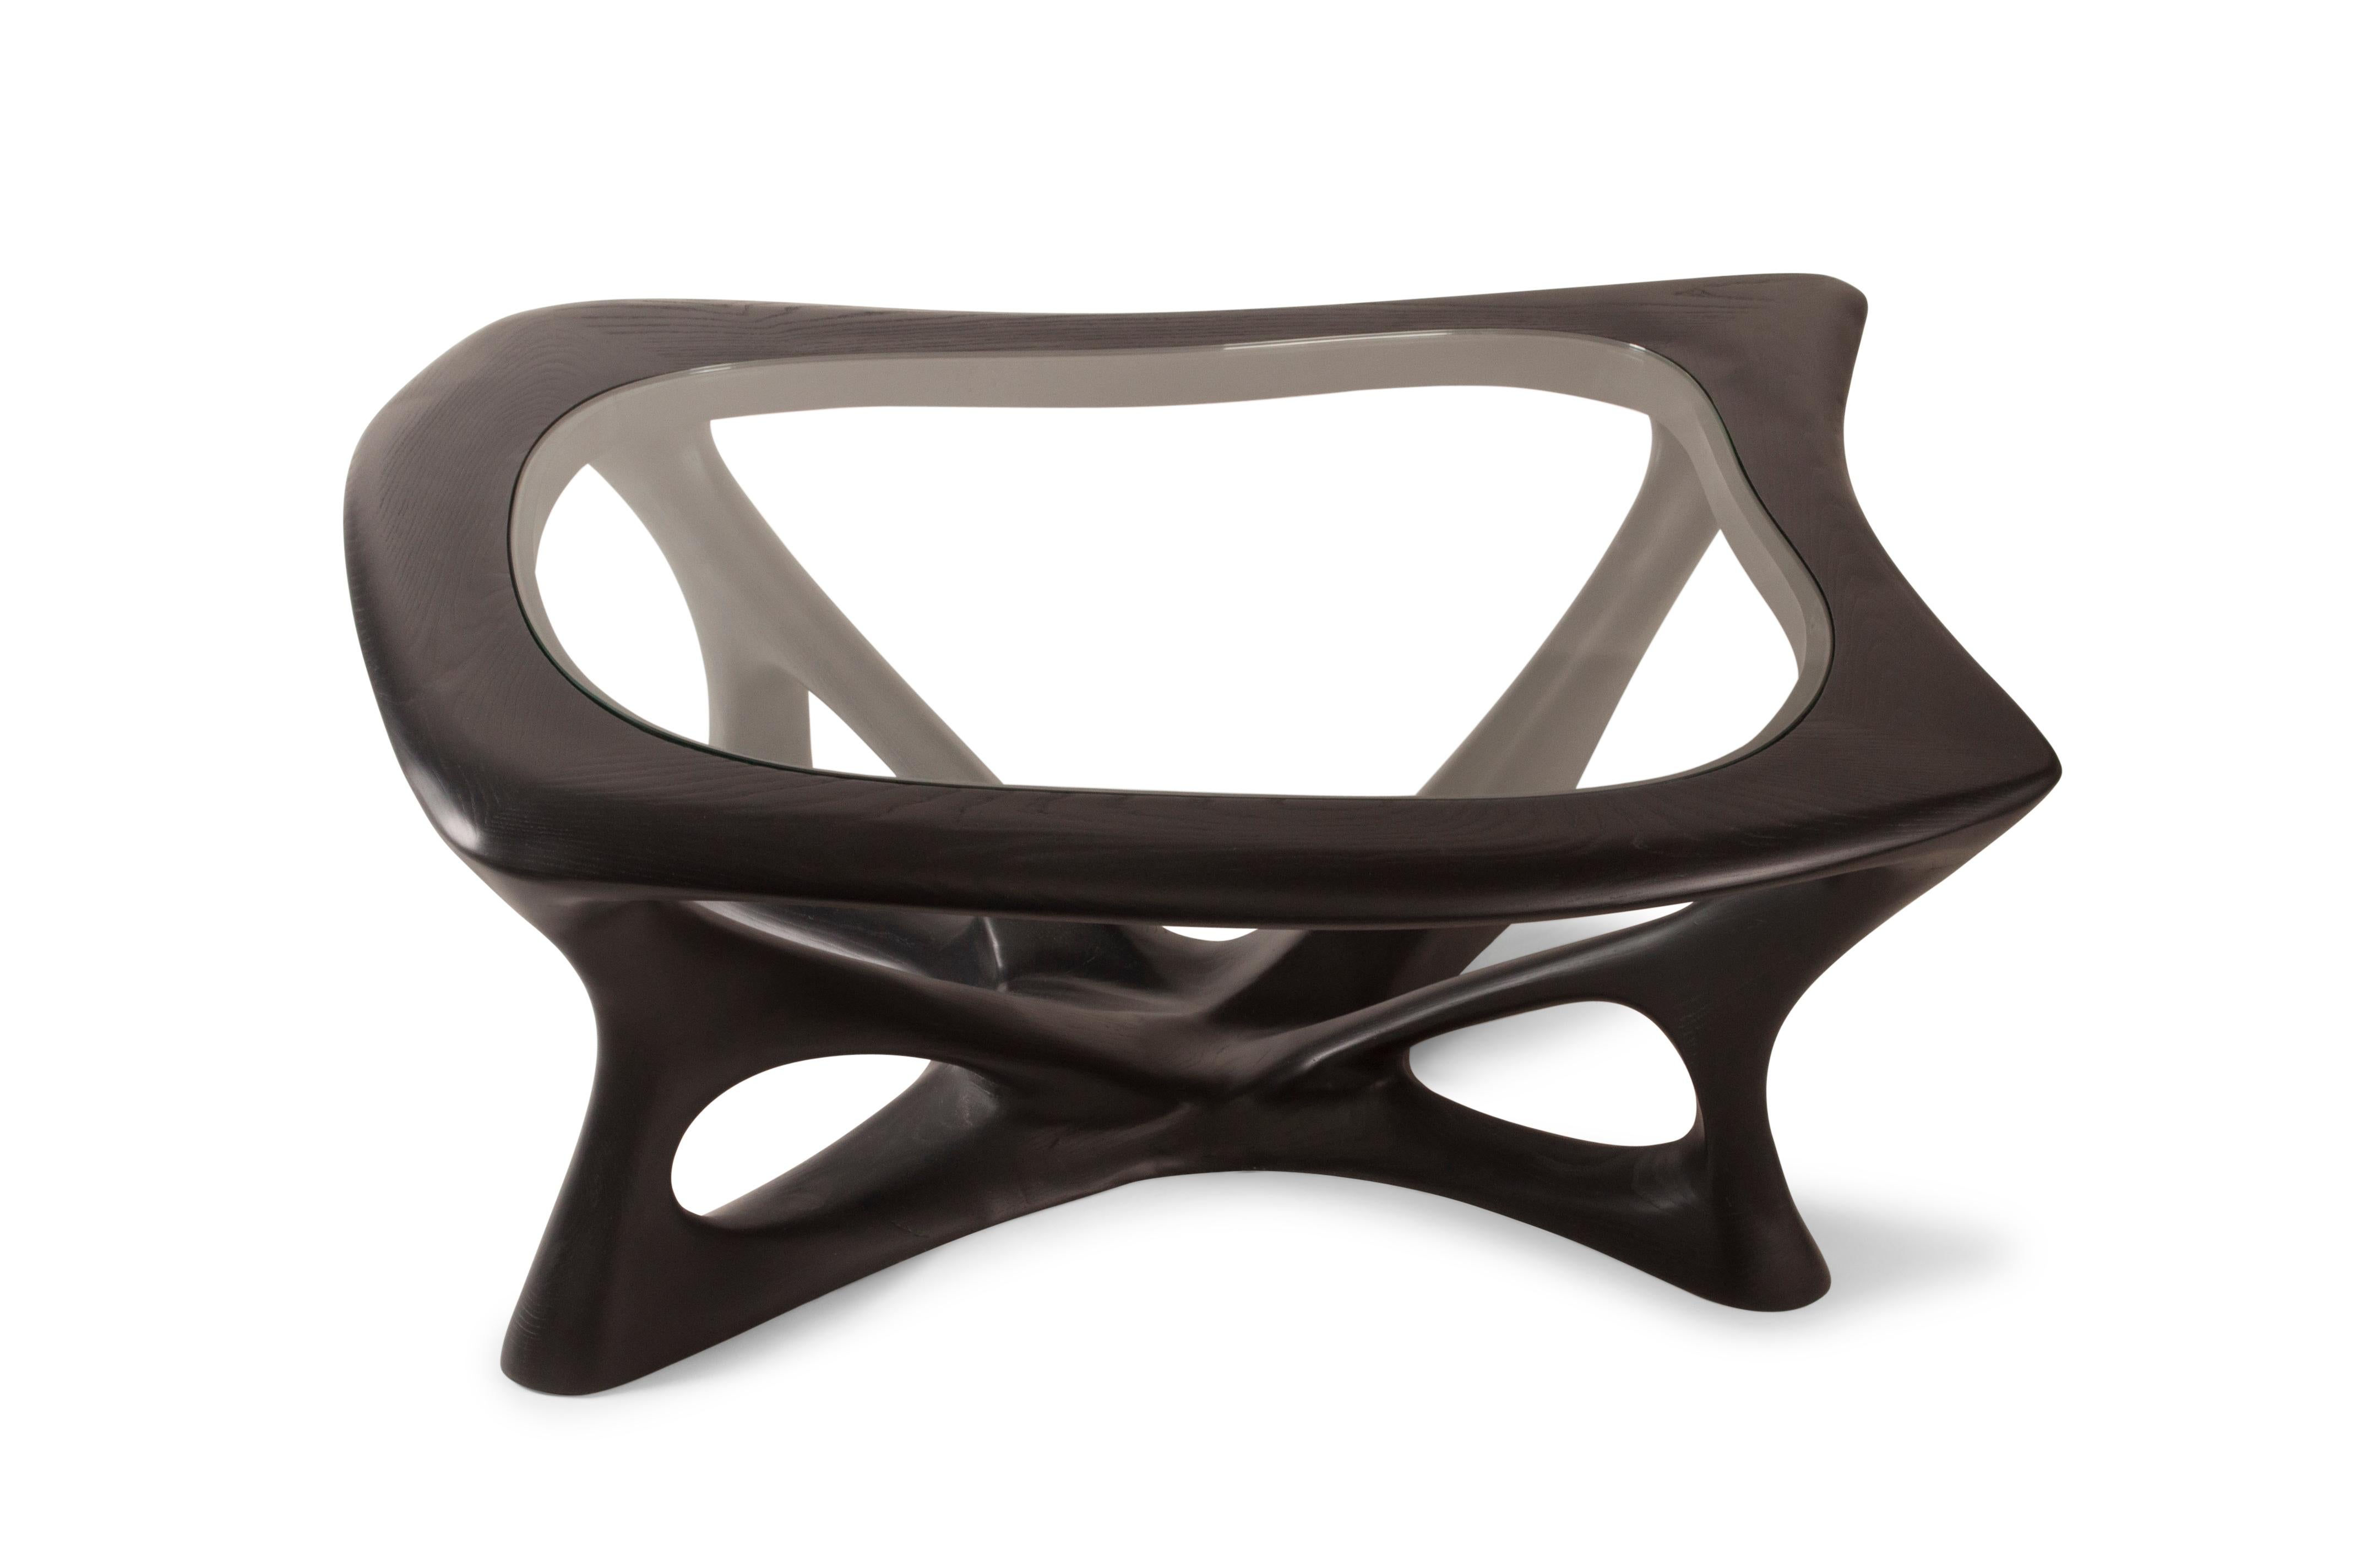 Ariella coffee table is made from solid ashwood. 

About Amorph: 
Amorph is a design and manufacturing company based in Los Angeles, California. We take pride in hand crafted designs connected to technology to create sophisticated, design driven